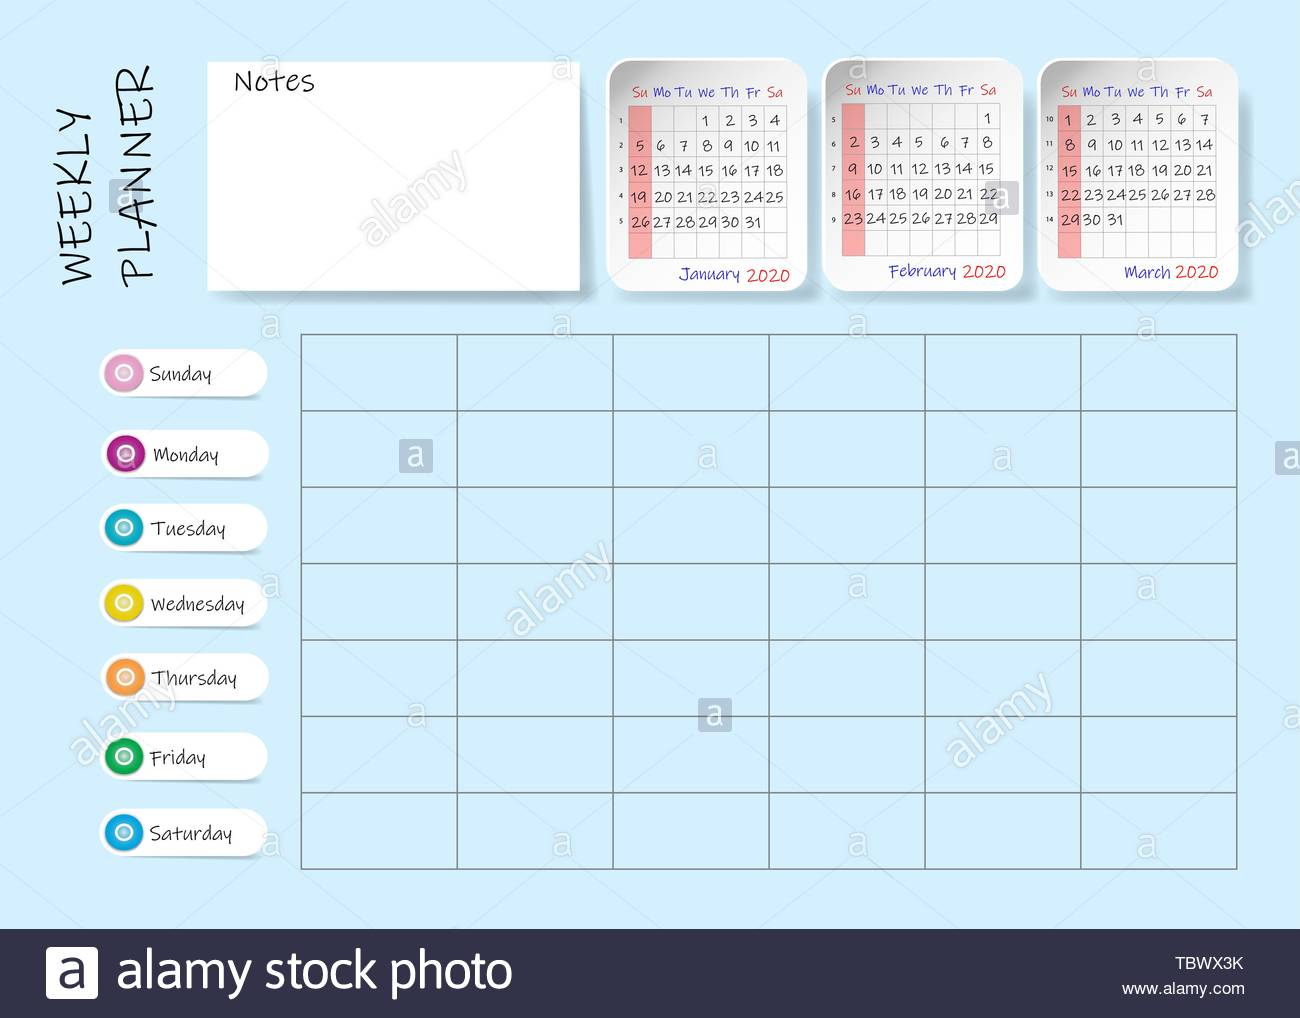 Calendar For First Quarter Of 2020 Year With Weekly Planner